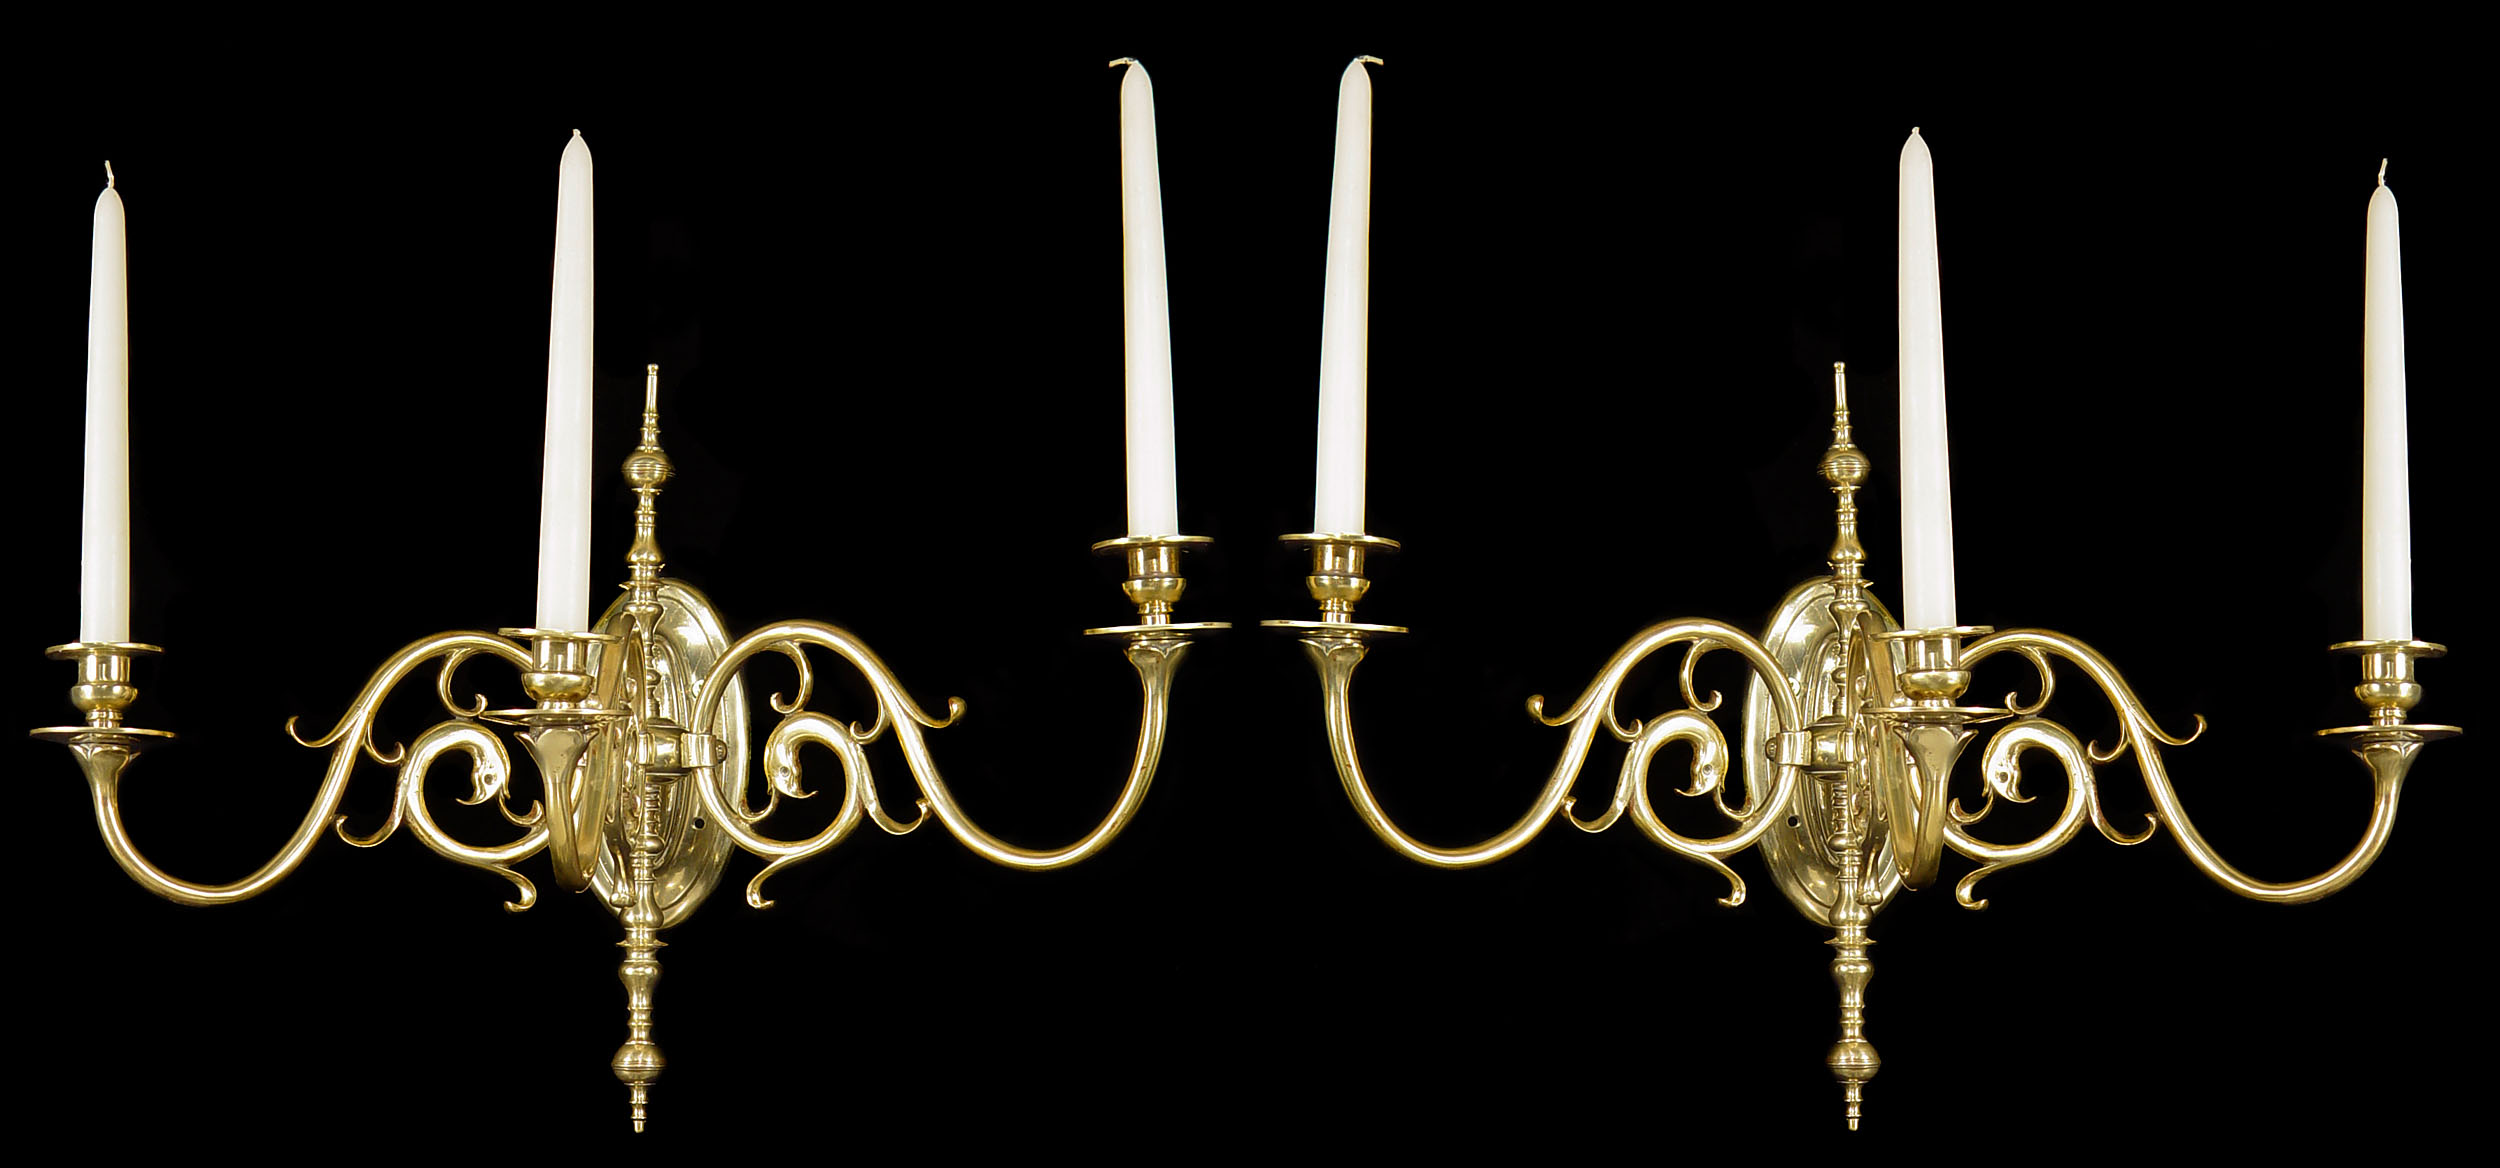 A Pair of Flemish Style Wall Lights
